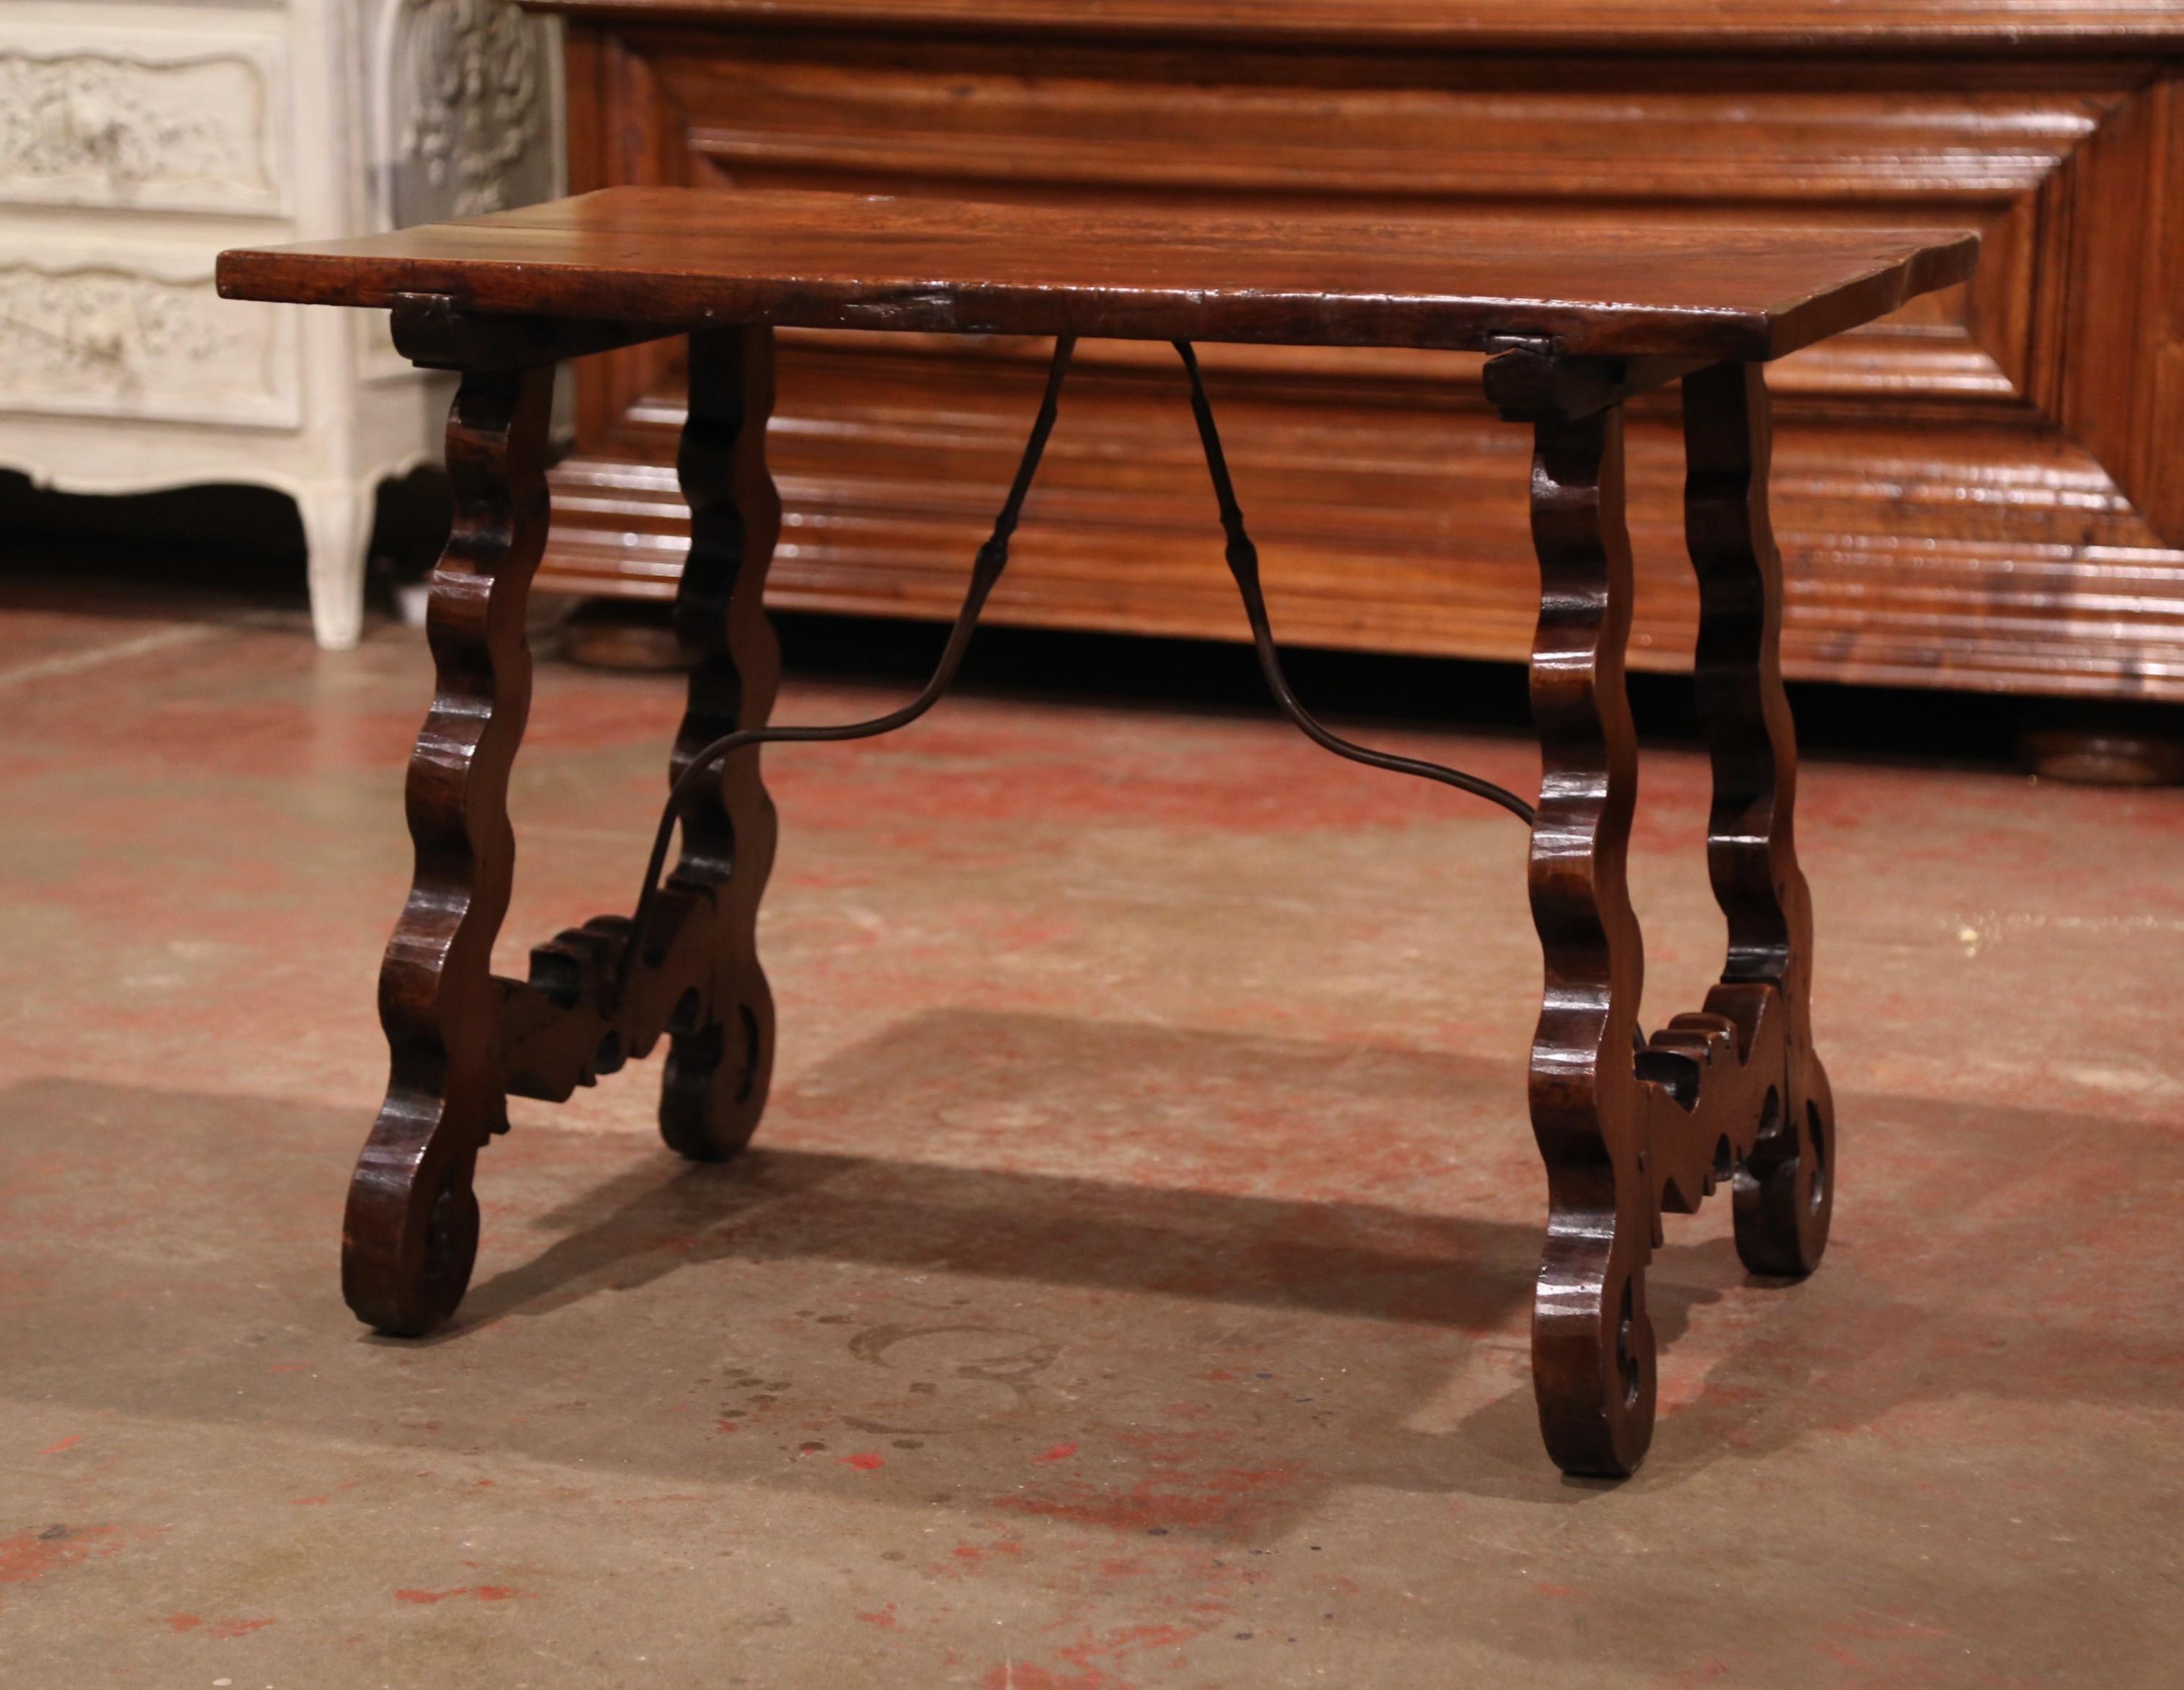 This elegant antique table was crafted in Spain, circa 1780. Built in walnut, the small end table features two carved, A-shape legs, which are connected in the center with a forged black wrought iron stretcher for stability and structure; the